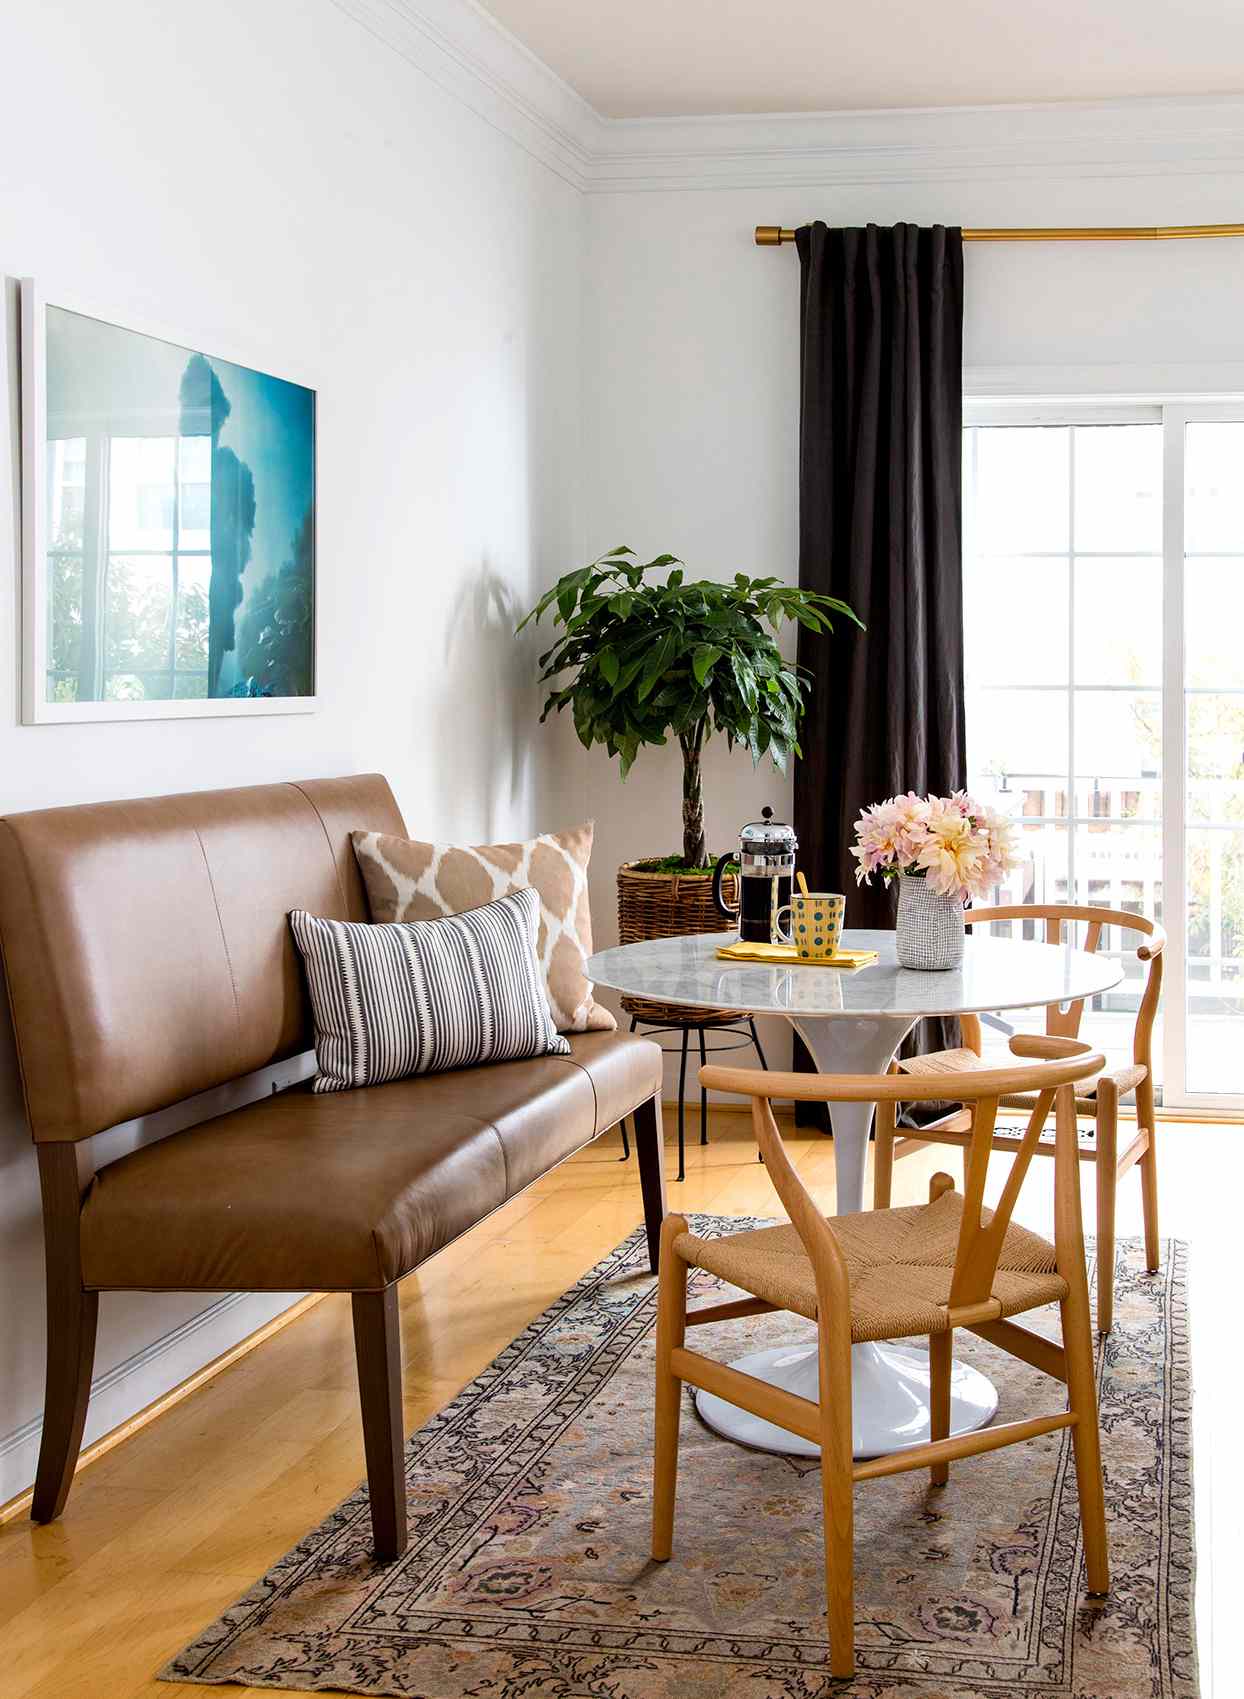 15 Small Dining Room Ideas To Make The, Dining Room Tables For Tiny Spaces